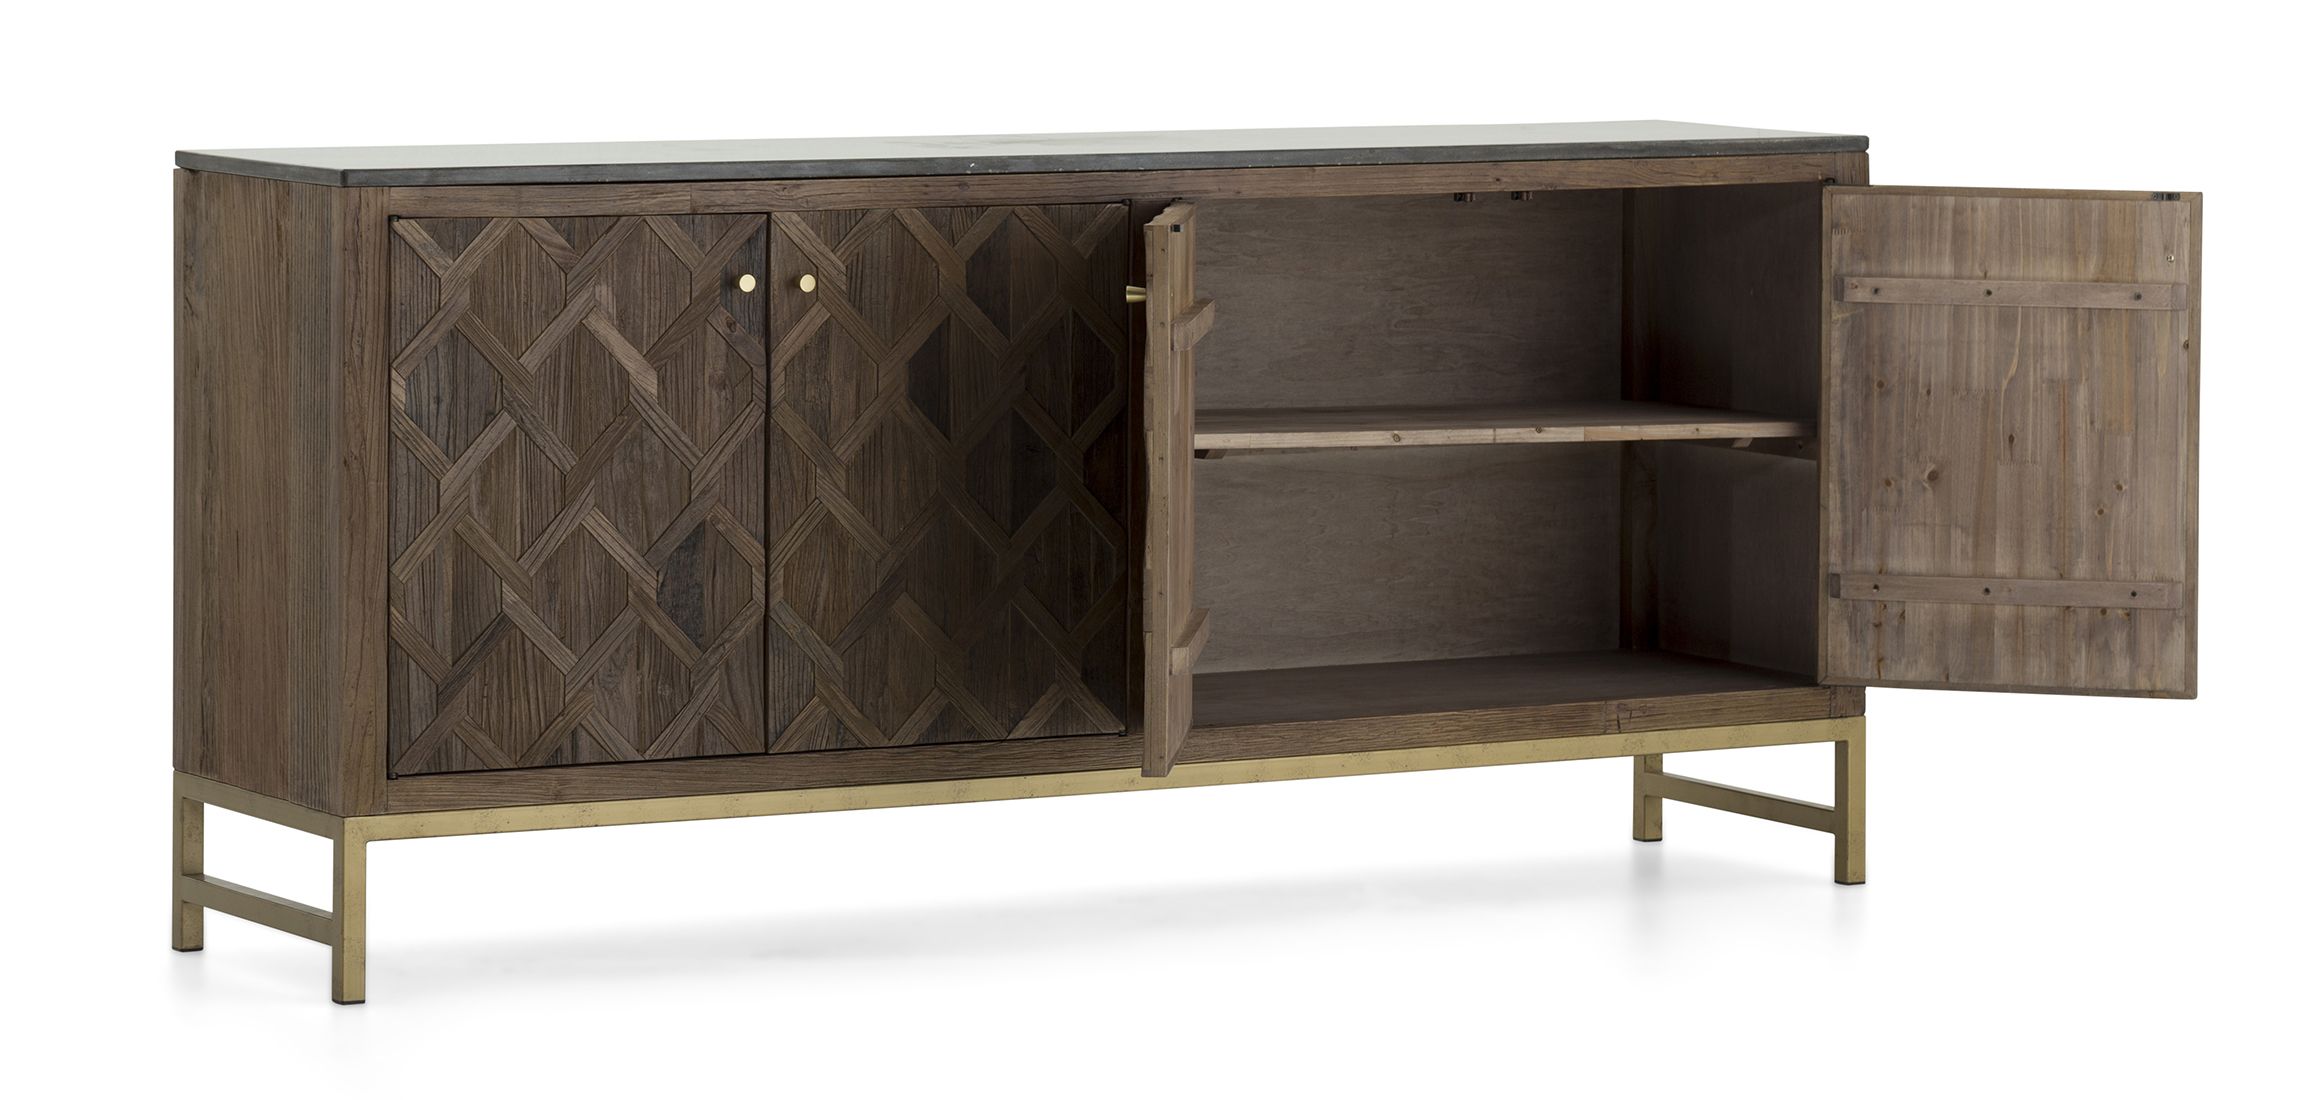 Shingo – Sideboard, 4 Doors | Flamant Intended For Most Up To Date Adkins Sideboards (View 4 of 20)